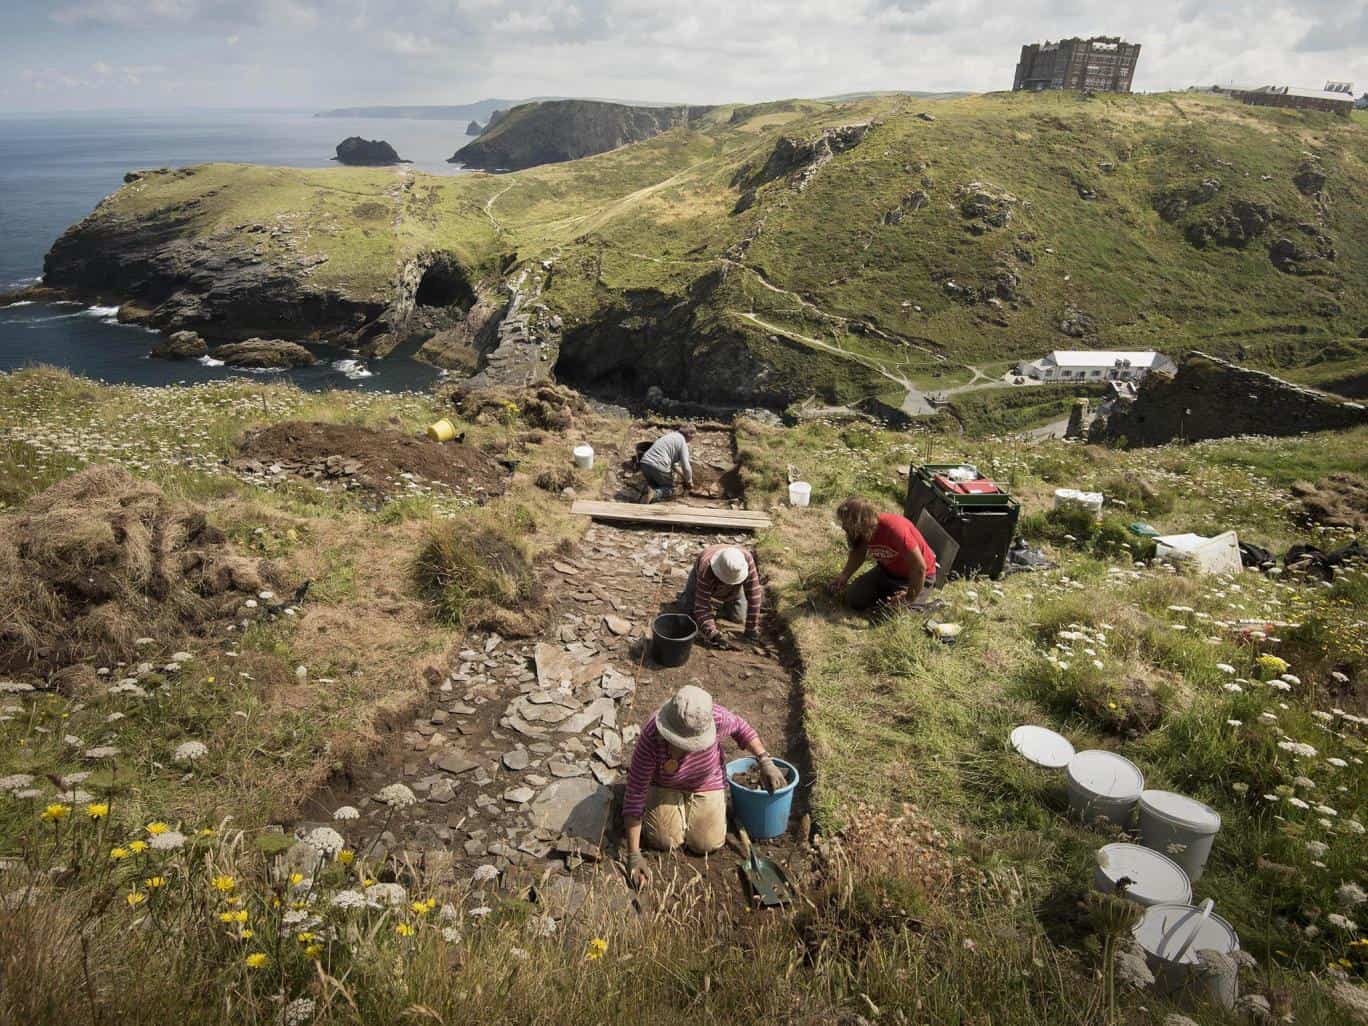 emilywhitfield-wicks----archeologydig- - Archaeologists believe they have found King Arthur’s Castle